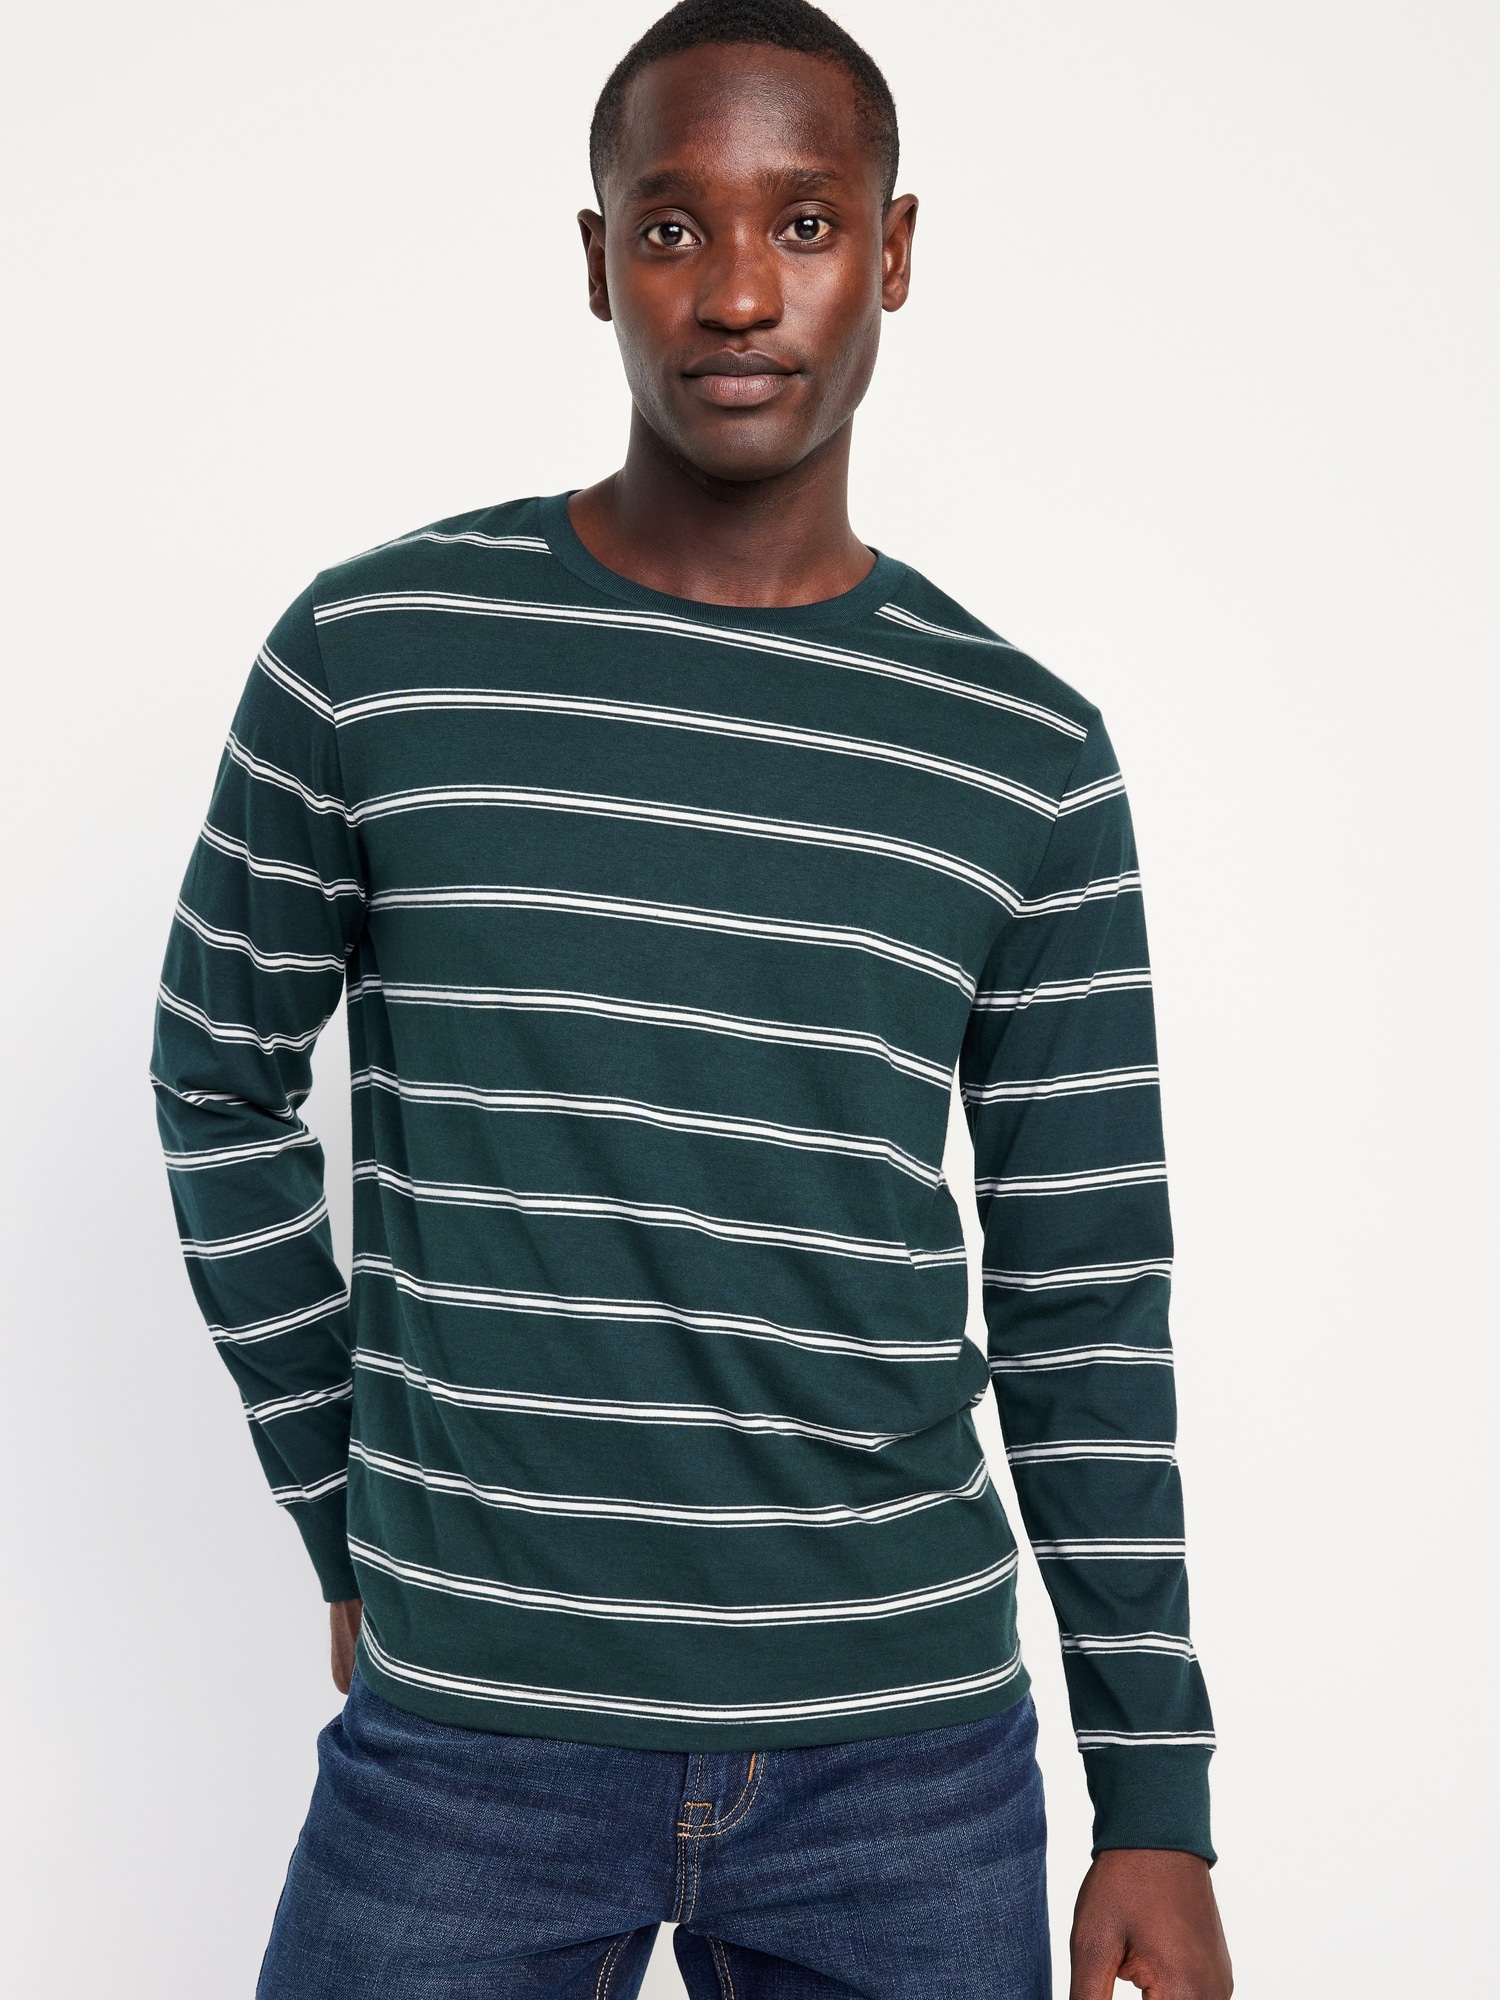 Long-Sleeve Striped Rotation T-Shirt for Men | Old Navy